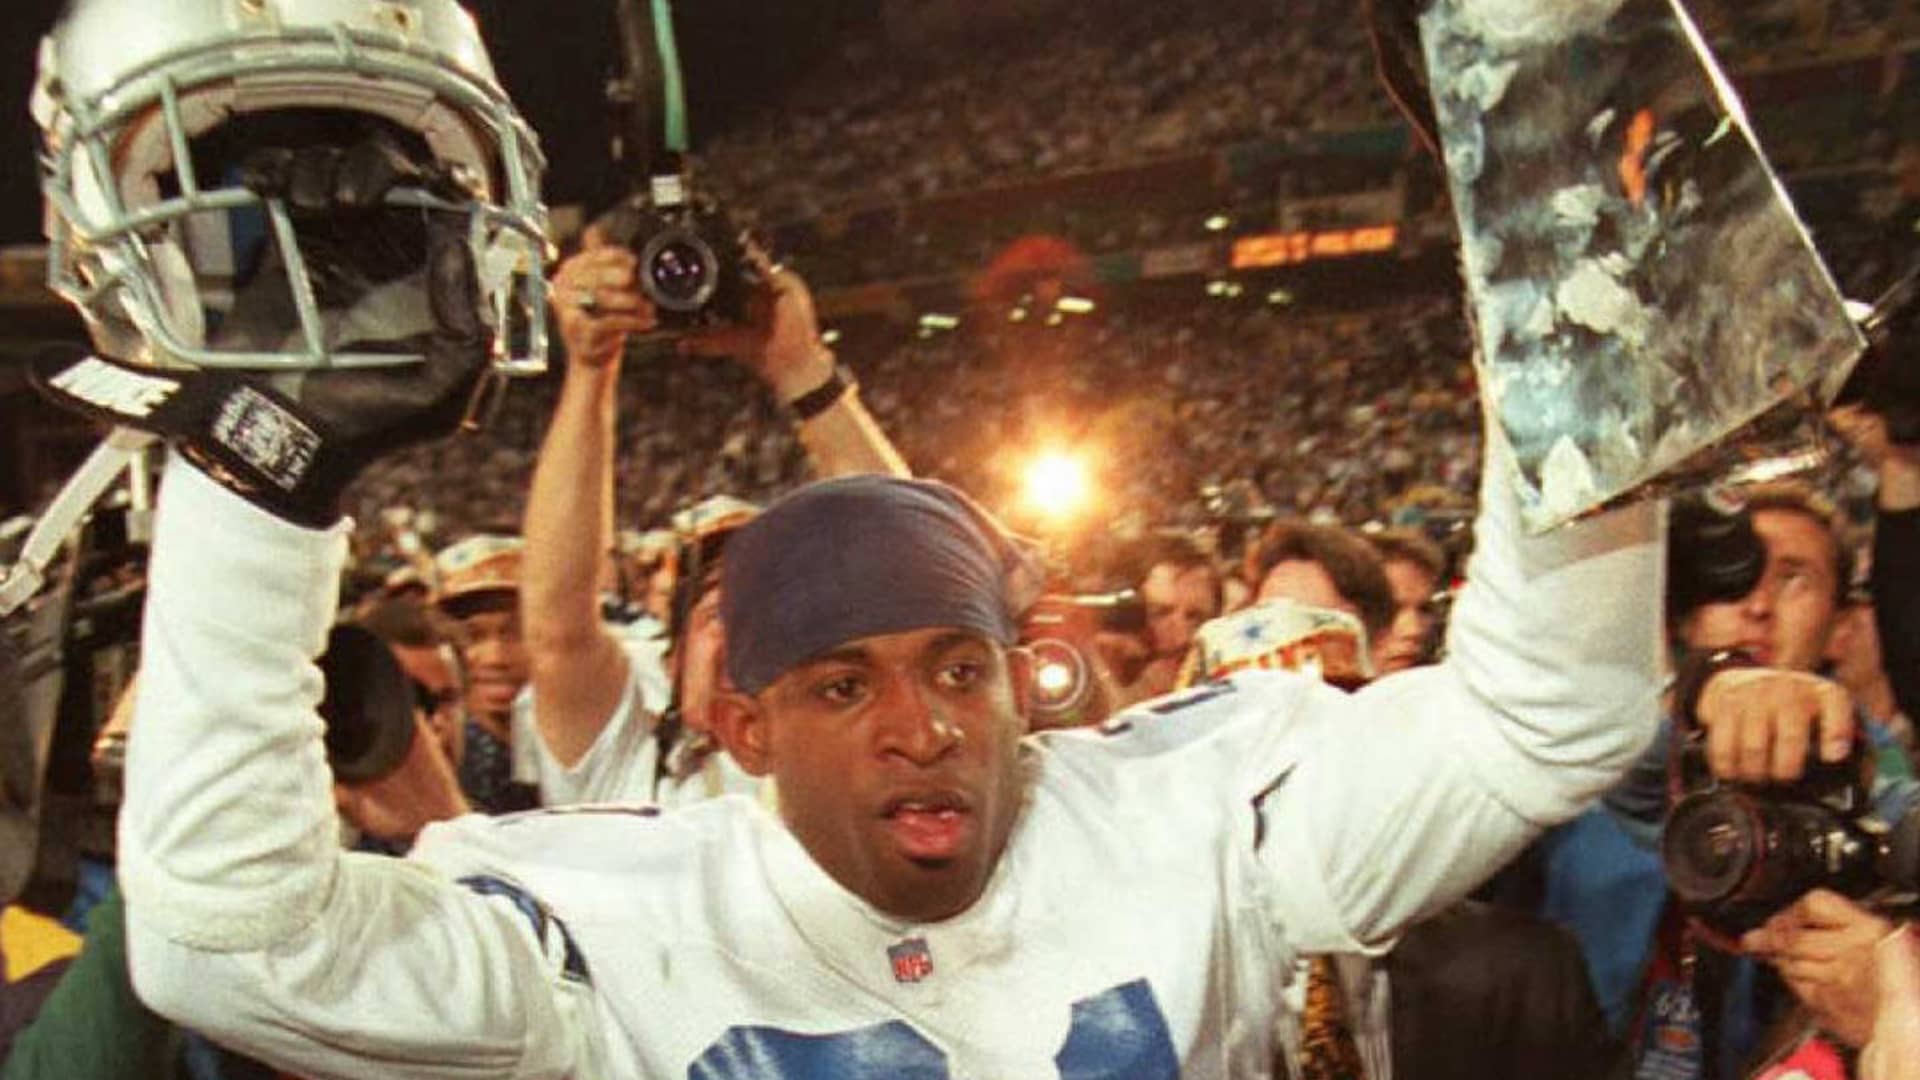 Dallas Cowboys cornerback Deion Sanders hoists the Vince Lombardi Super Bowl trophy as he walks off the field to the locker room after defeating the Pittsburgh Steelers 28 January during Super Bowl XXX at Sun Devil Stadium in Tempe, Arizona. The Cowboys won 27-17.